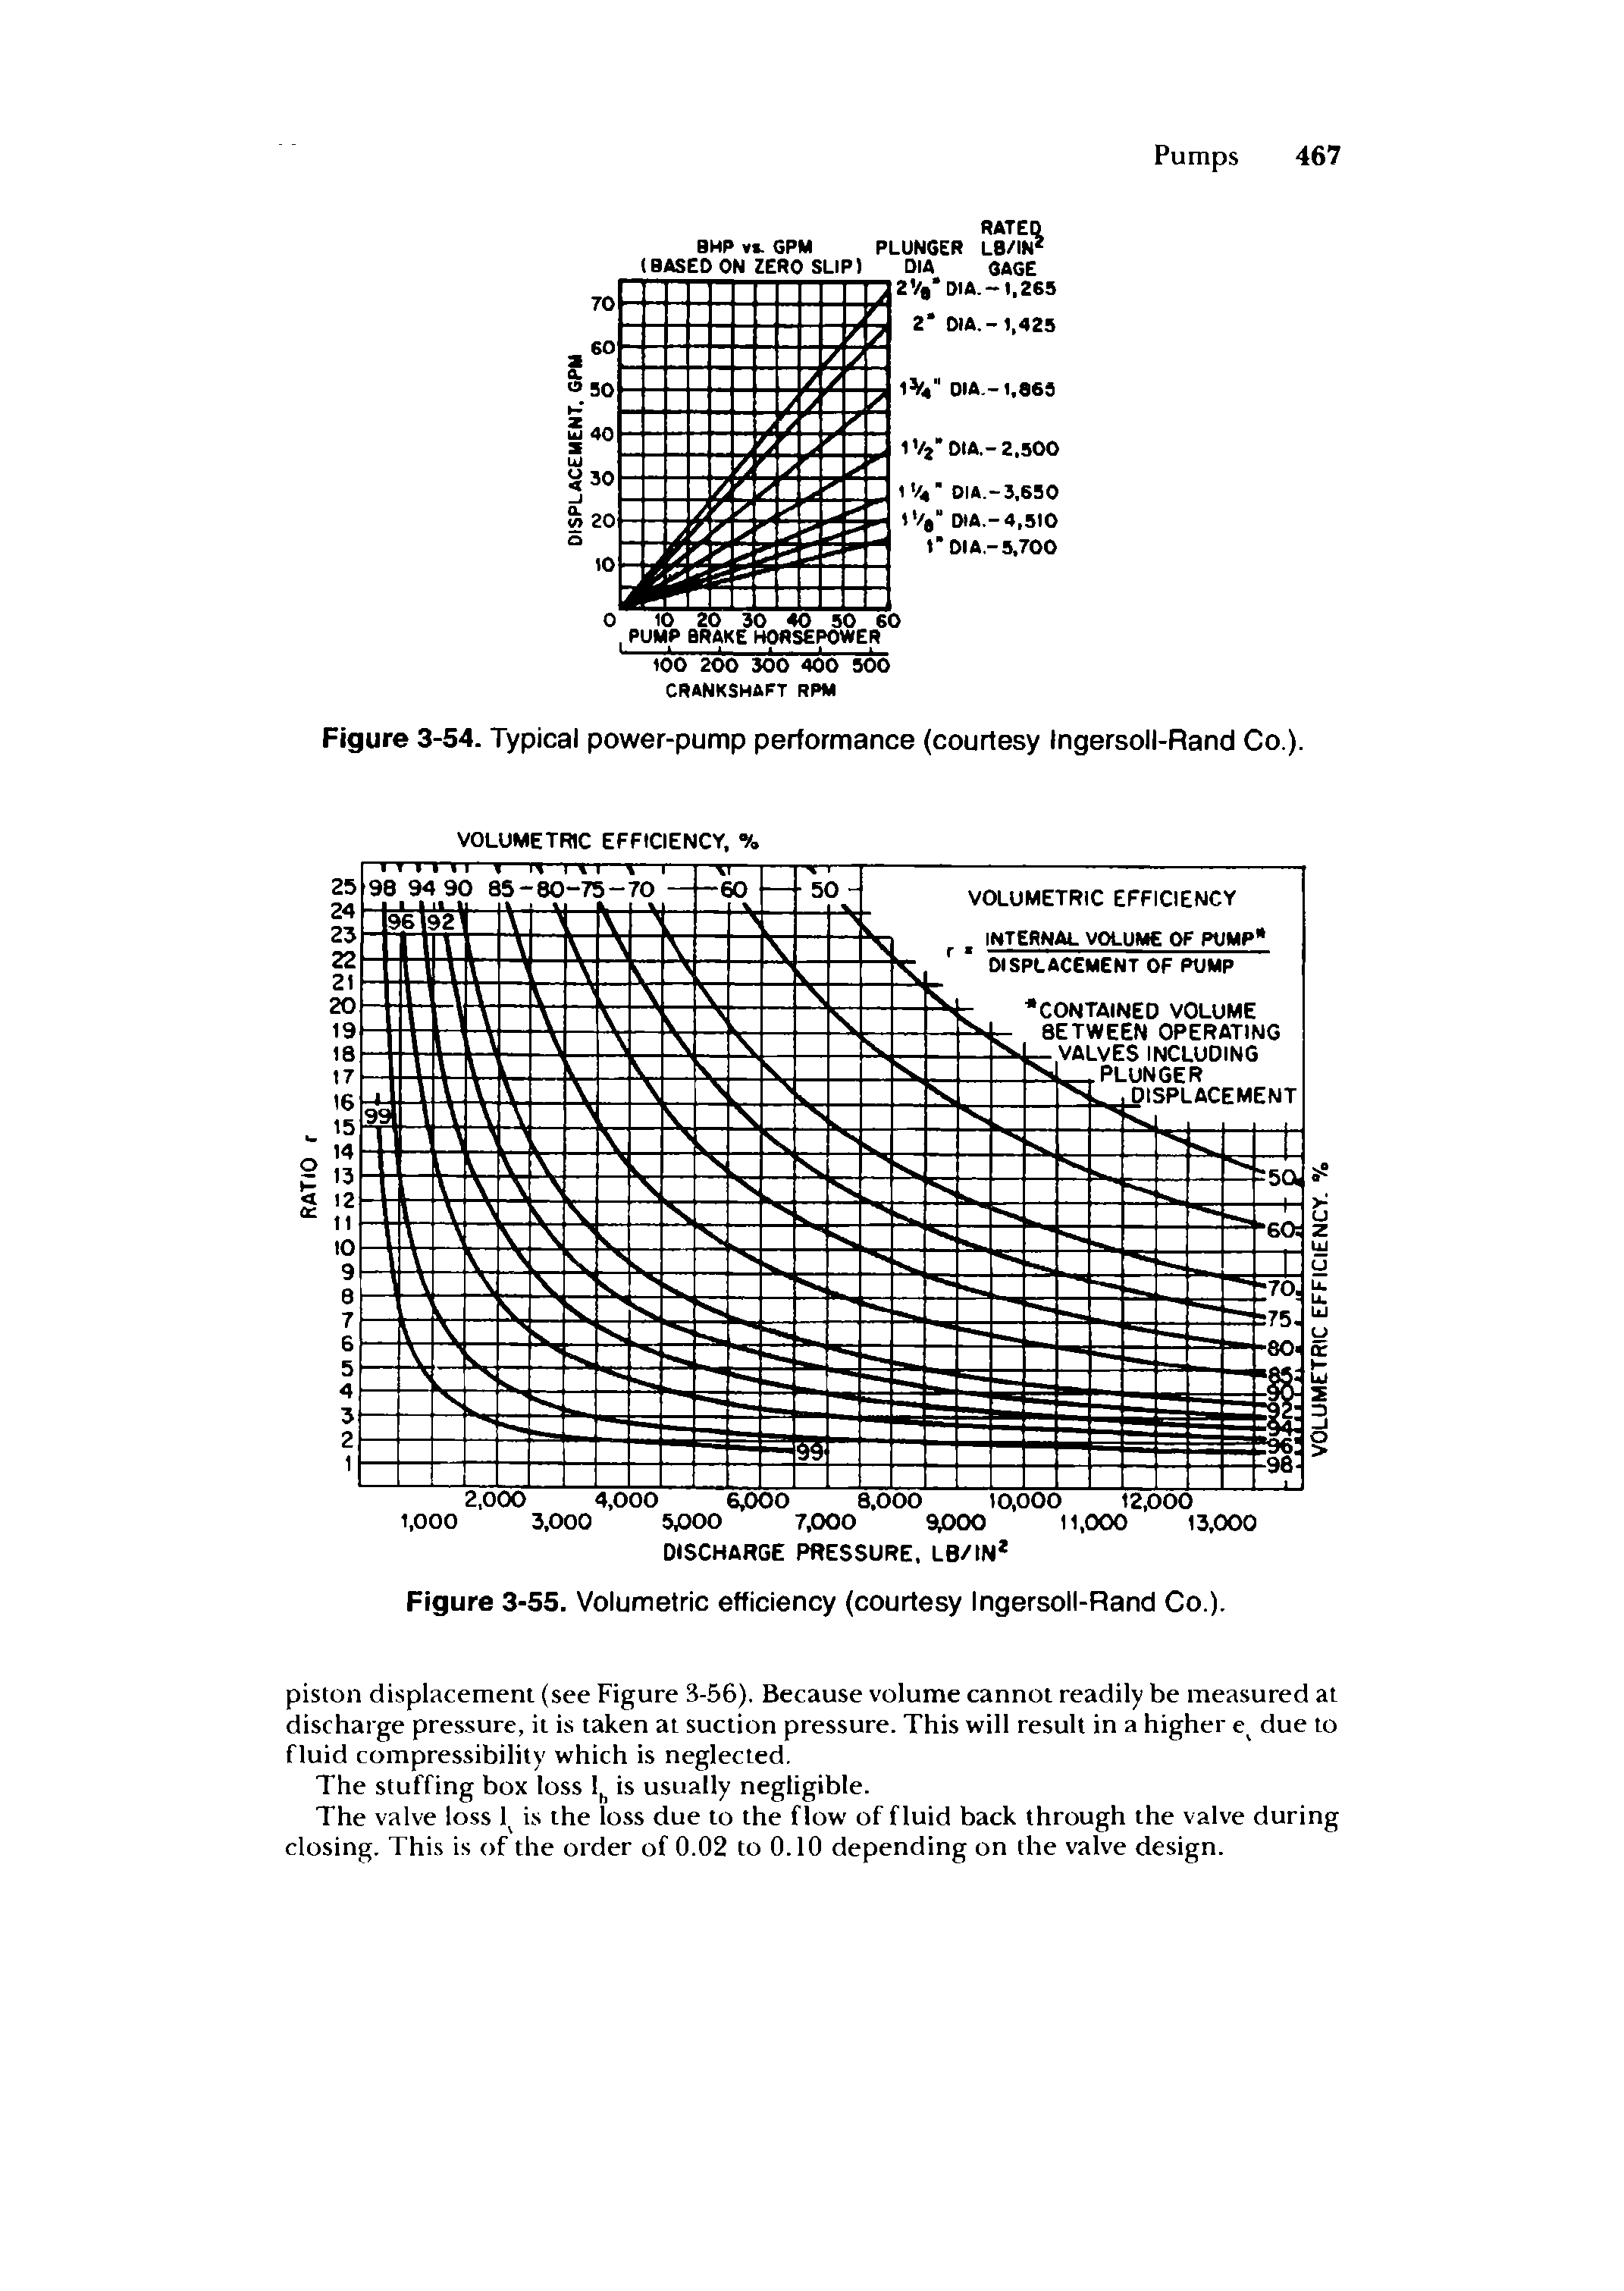 Figure 3-54. Typical power-pump performance (courtesy Ingersoll-Rand Co.).